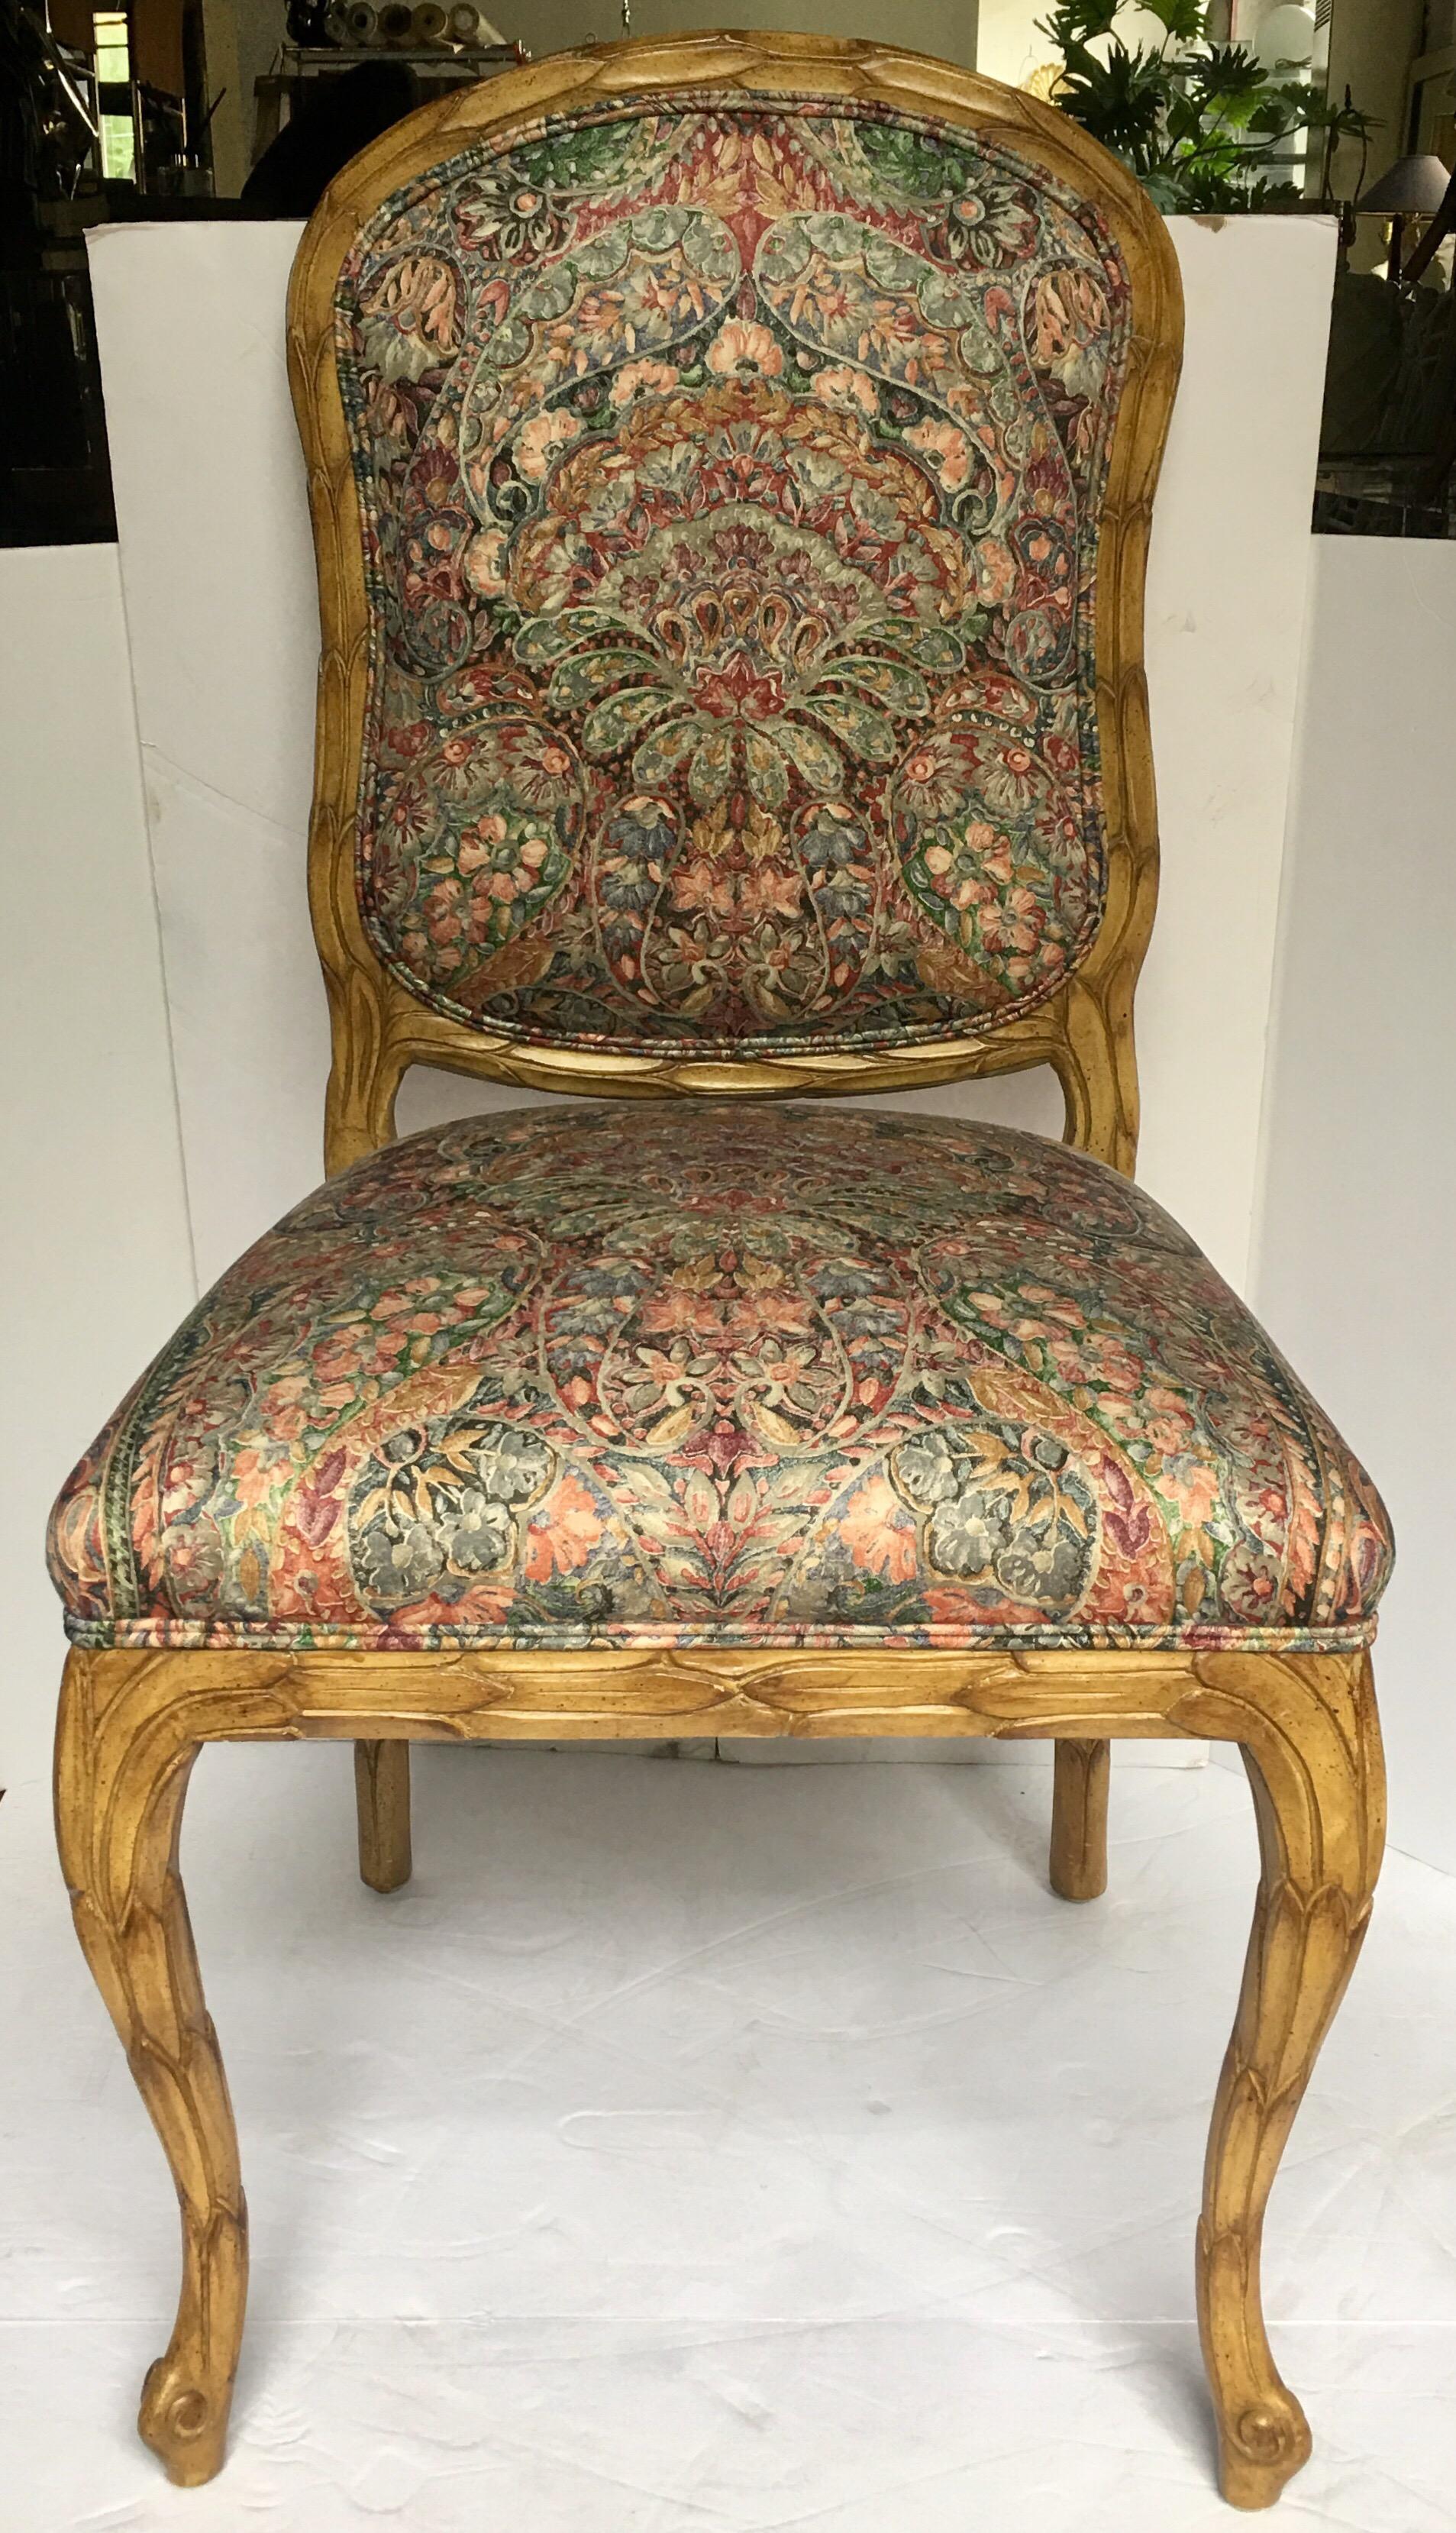 Hollywood Regency style accent or desk chair in the style of Serge Roche. This Louis XV style chair features a carved palm leaf design and original paisley upholstery with a contrast moire faux bois fabric on back, circa 1970s.